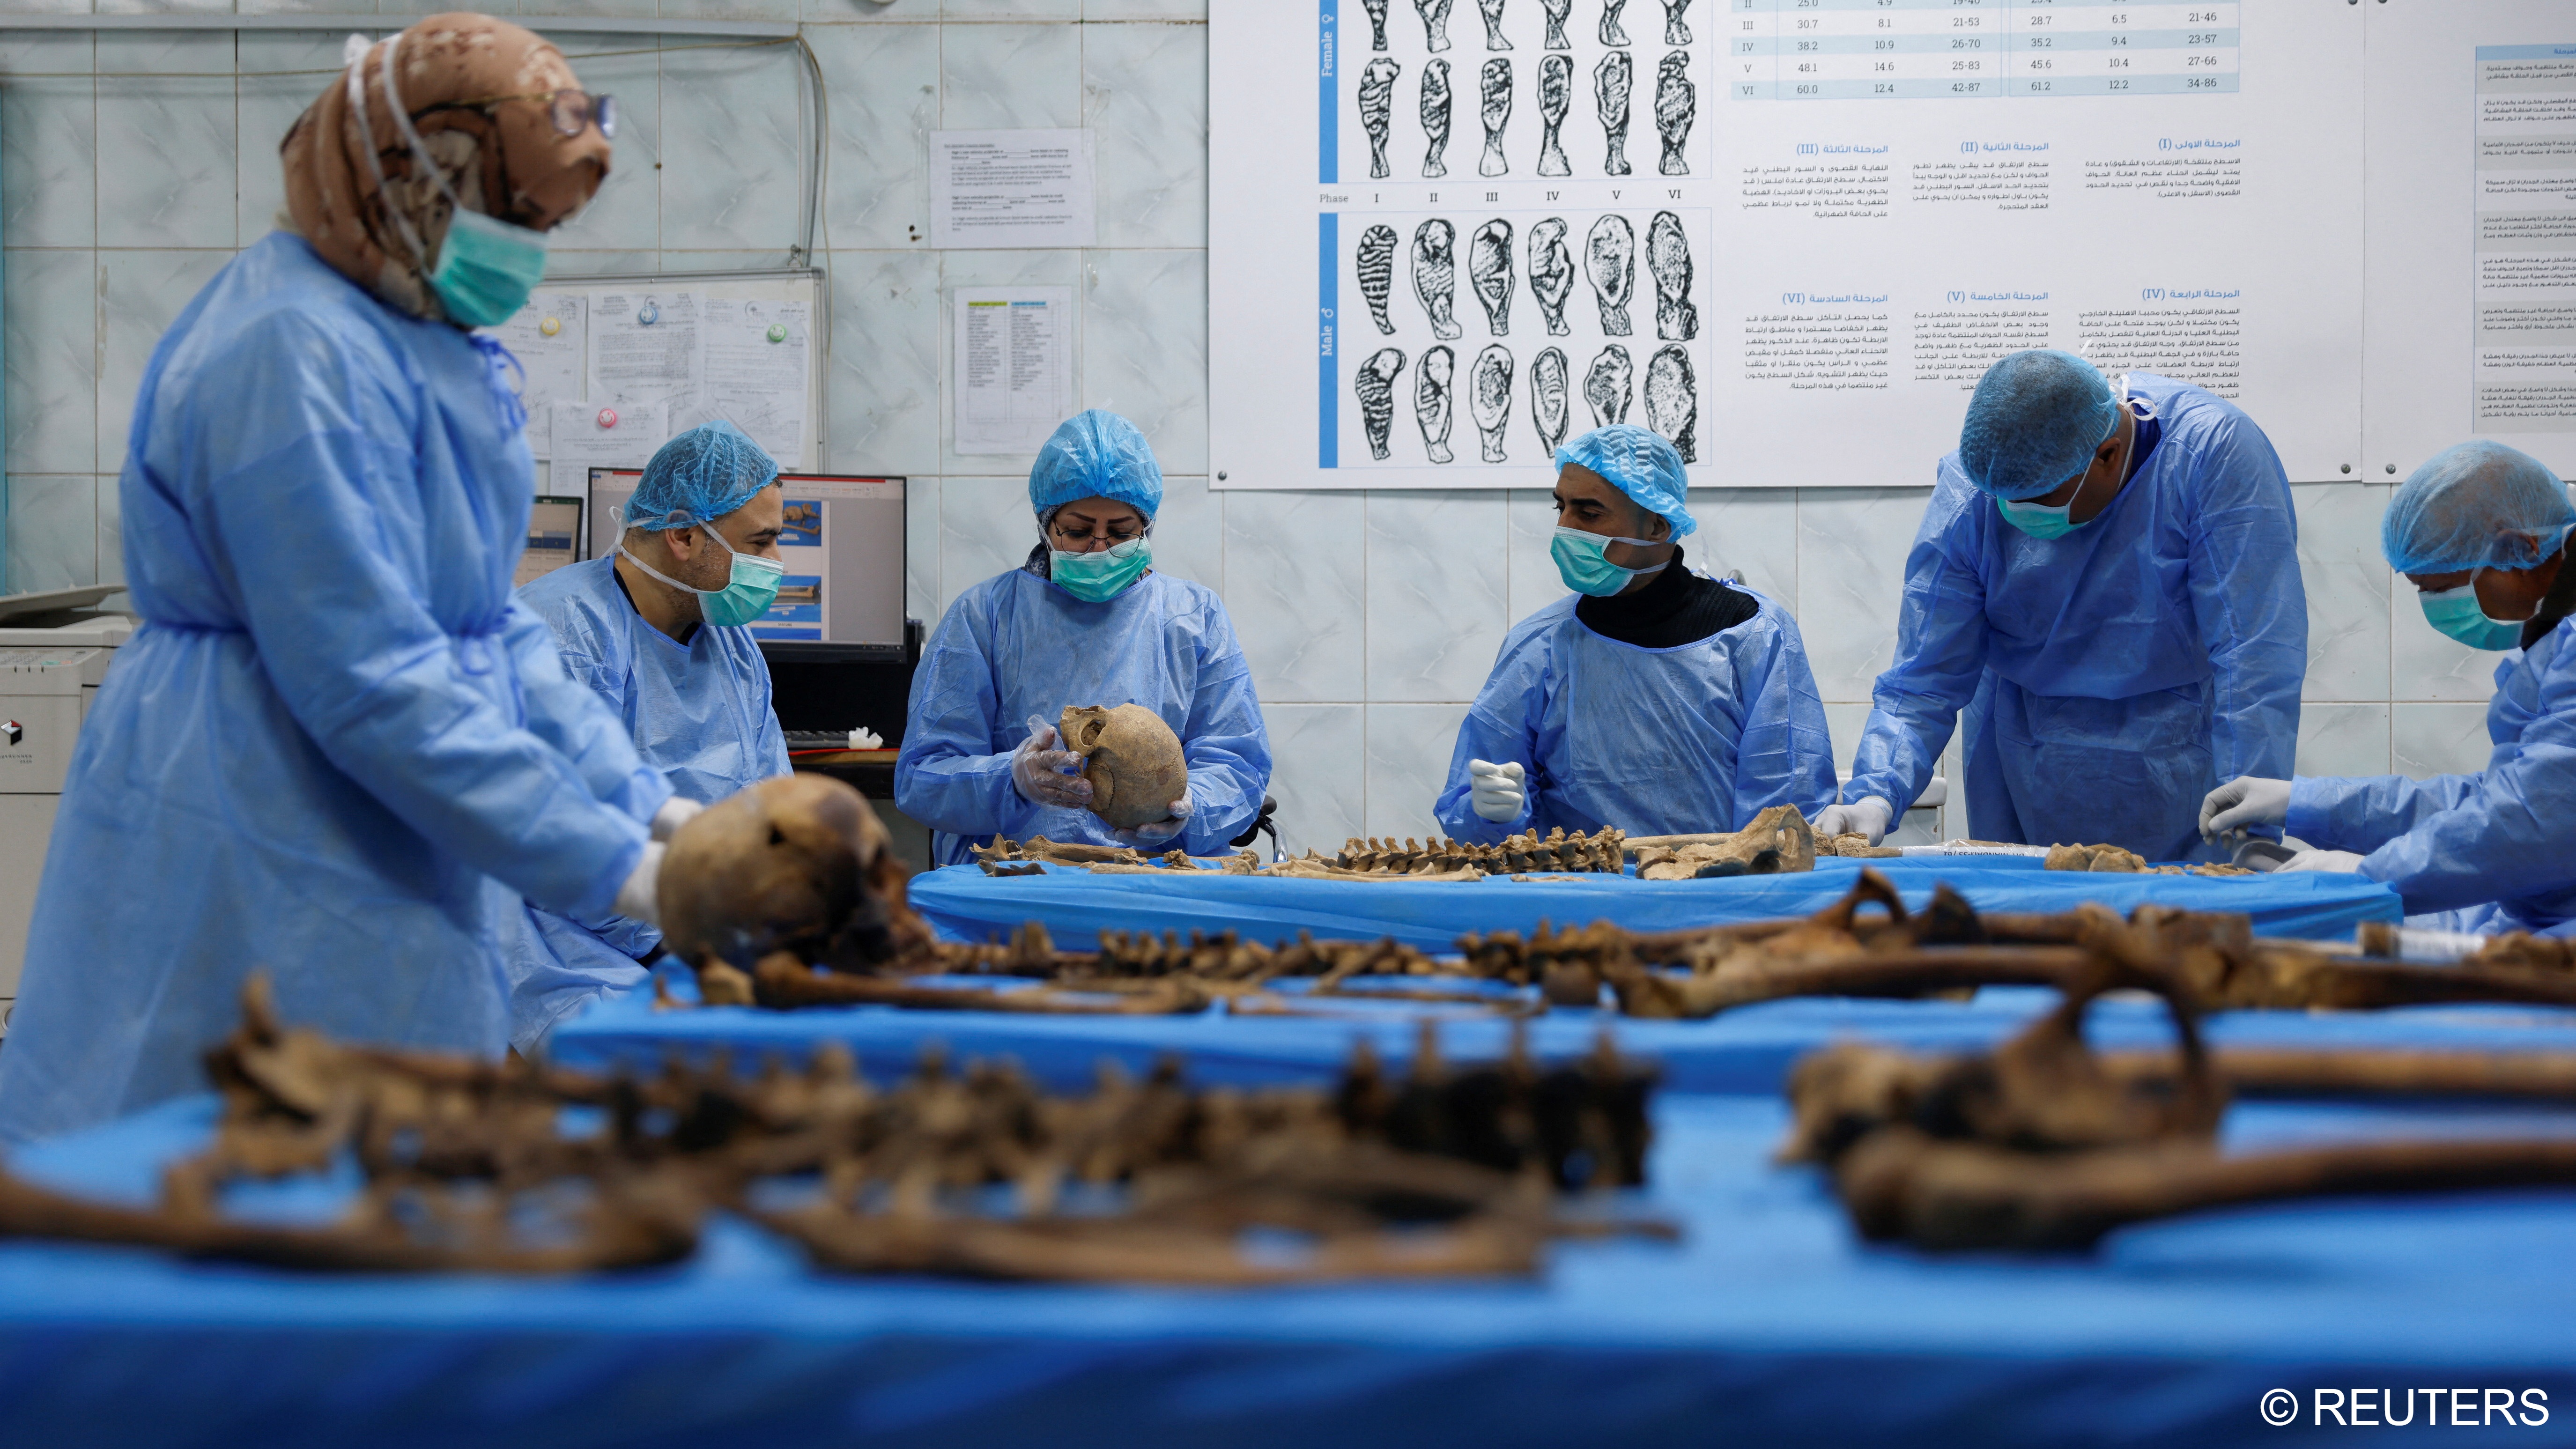 A team works to identify remains exhumed from a mass grave in the mass grave section of the medico-legal directorate of Iraq's ministry of health, in Baghdad, January 2023 (image: Reuters/Ahmed Saad)